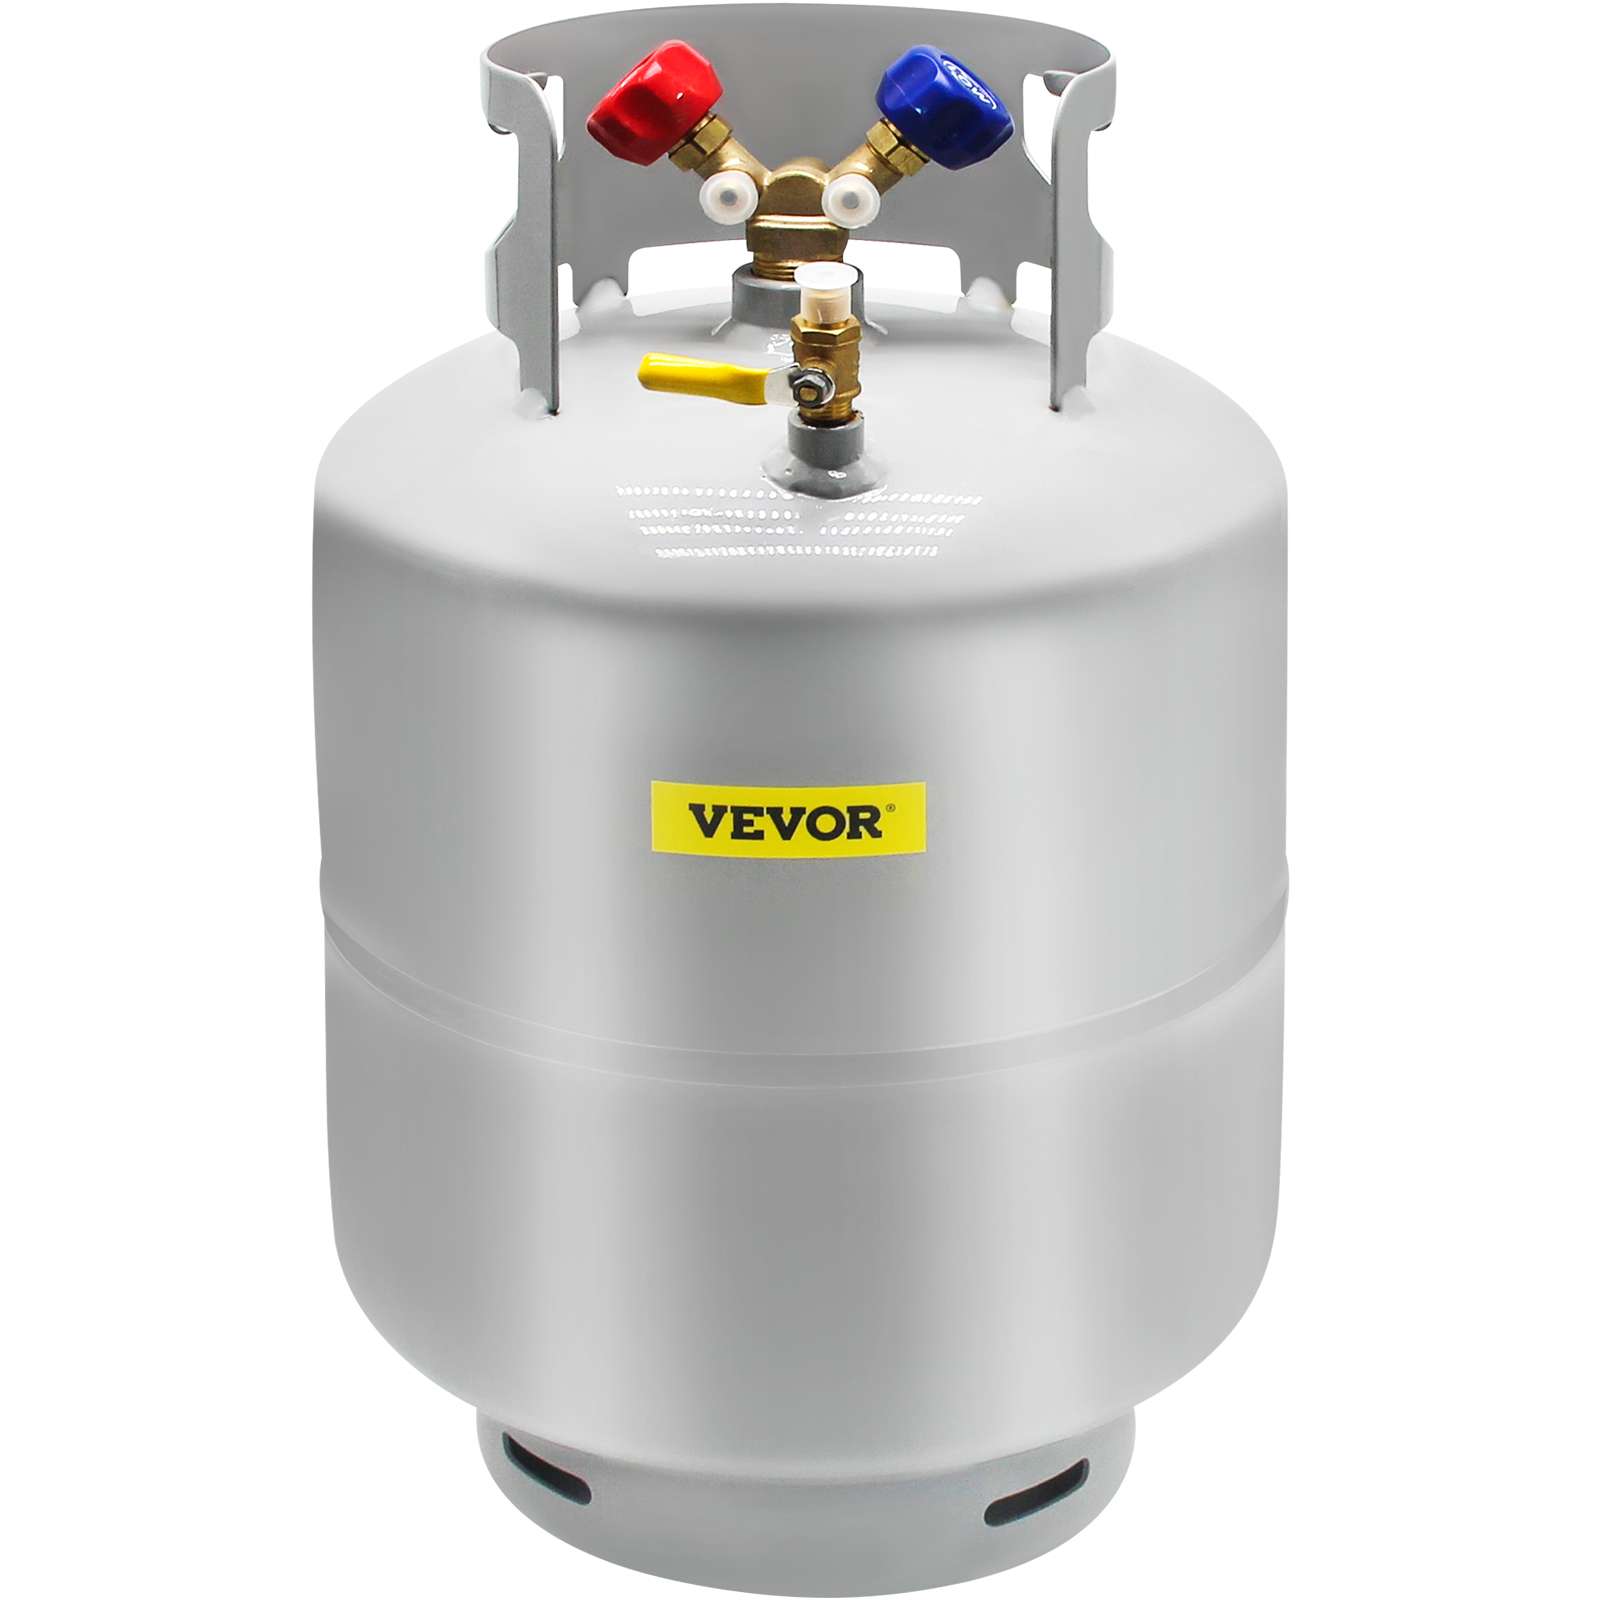 VEVOR Refrigerant Recovery Tank, 50 LBS Capacity, 400 psi Portable Cylinder  Tank with Y-Valve for Liquid/Vapor, High-Sealing Recovery Can for  R22/R134A/R410A, Gray VEVOR US